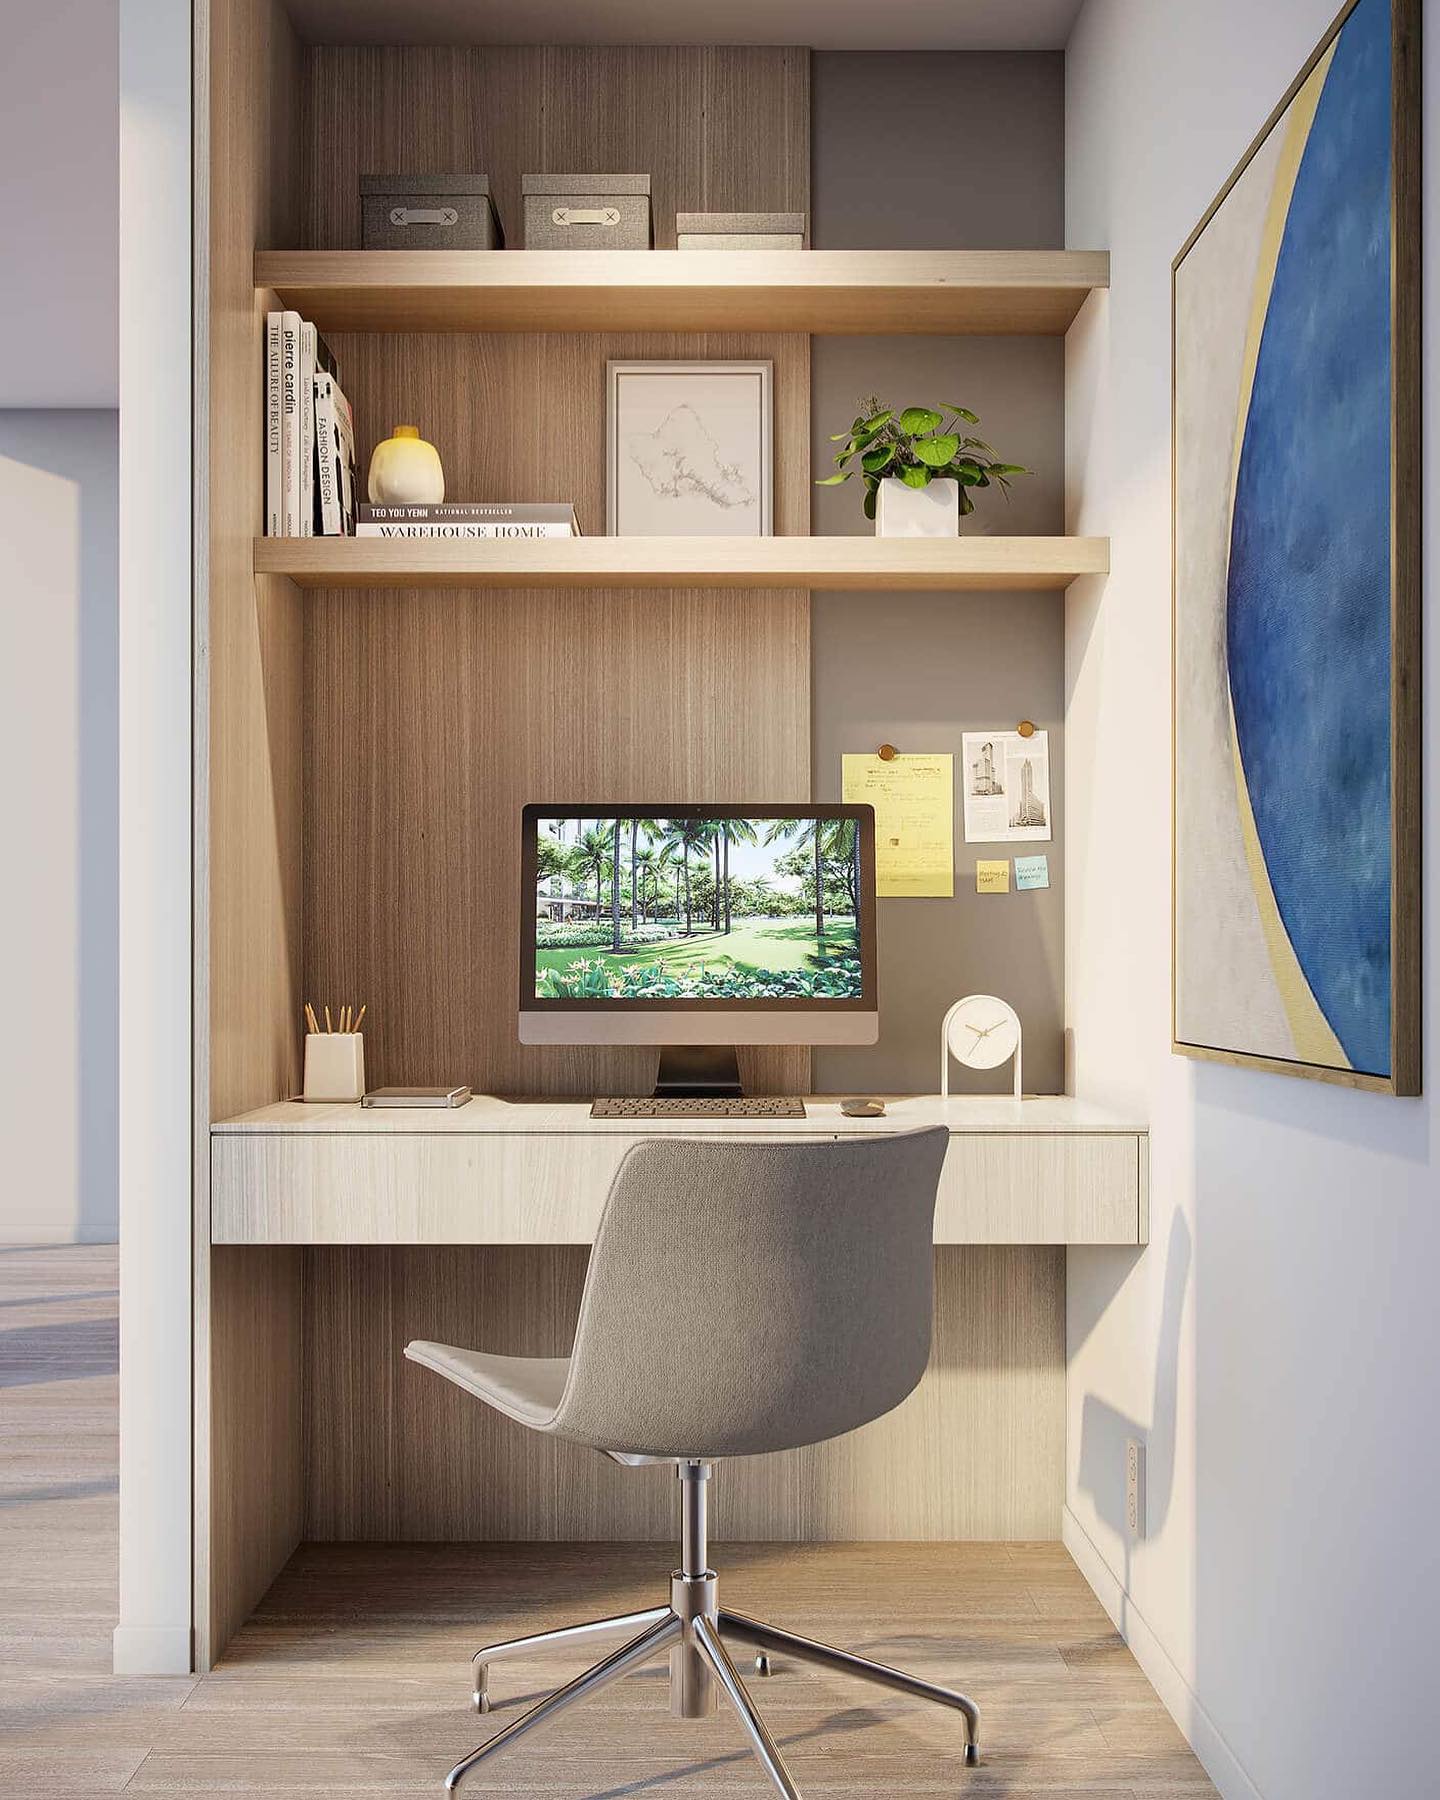 At The Park Ward Village, residences can be upgraded to include a built-in office nook to maximize space and encourage flexible living. This dedicated area inspires creativity and productivity for school and work, and is also the perfect place to display books and collectibles. Learn more in our link in bio!